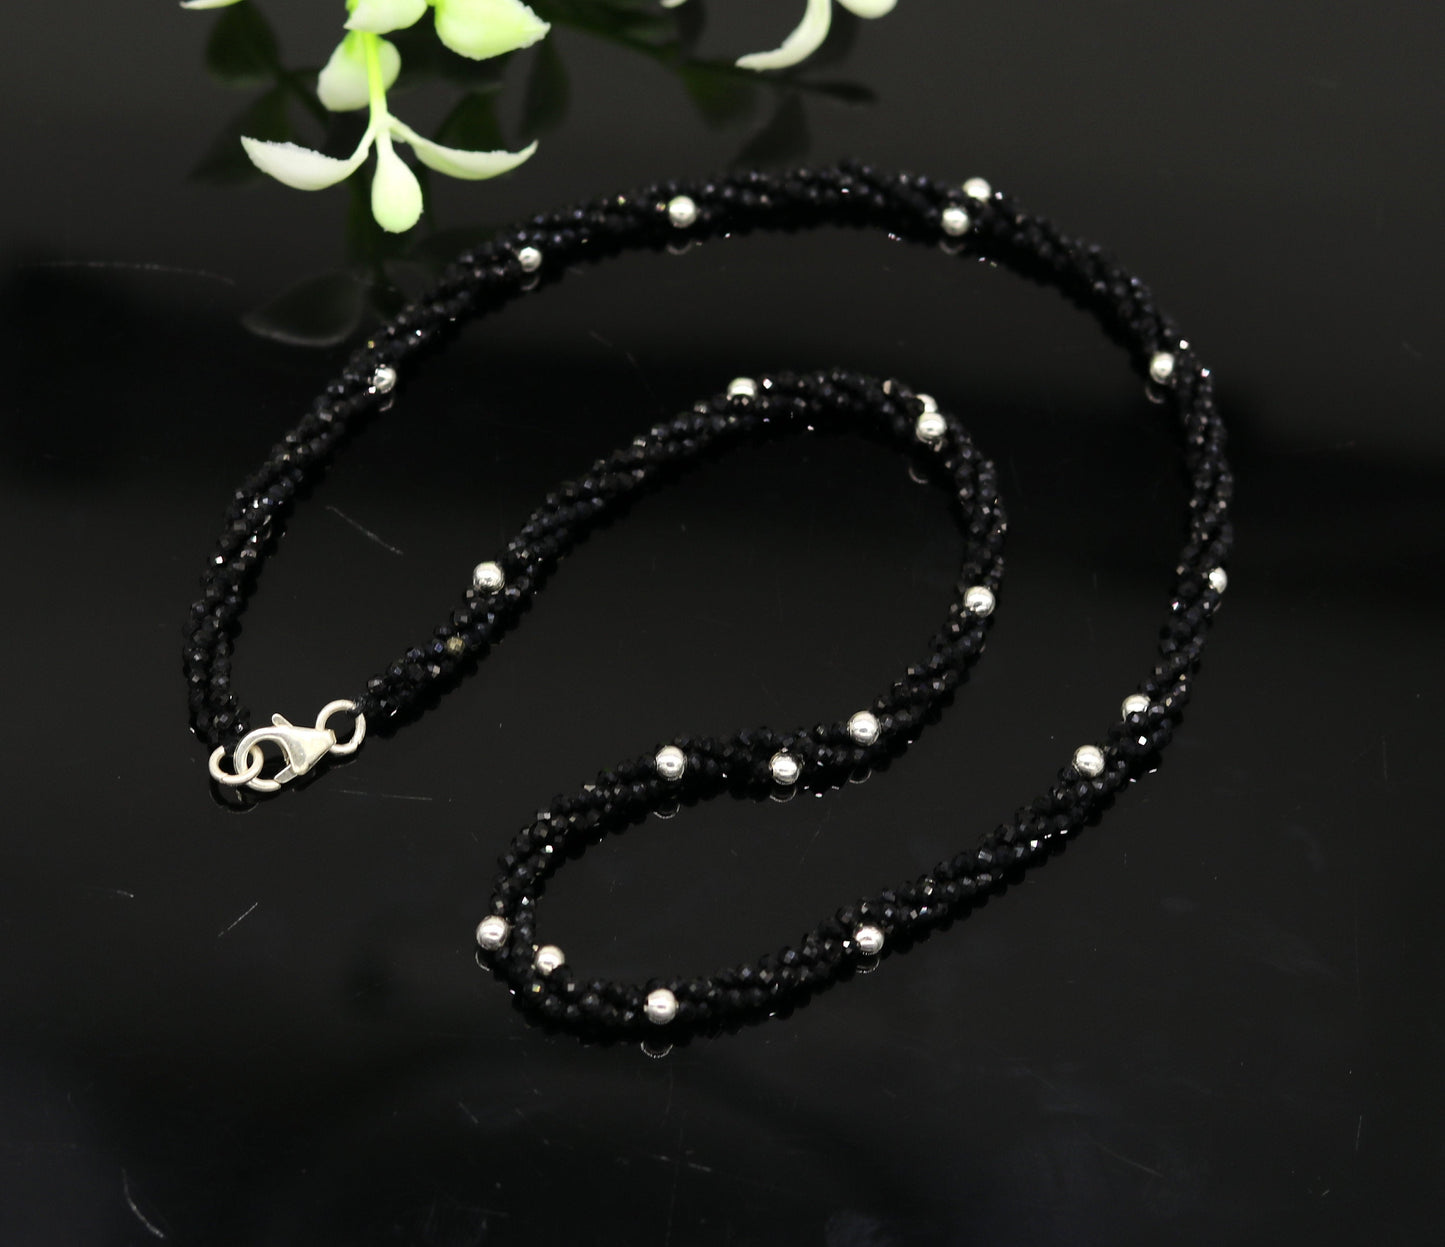 18" 925 pure silver galaxy necklace triple strands semi precious black cut stone beads with randomly placed silver beads necklace set135 - TRIBAL ORNAMENTS